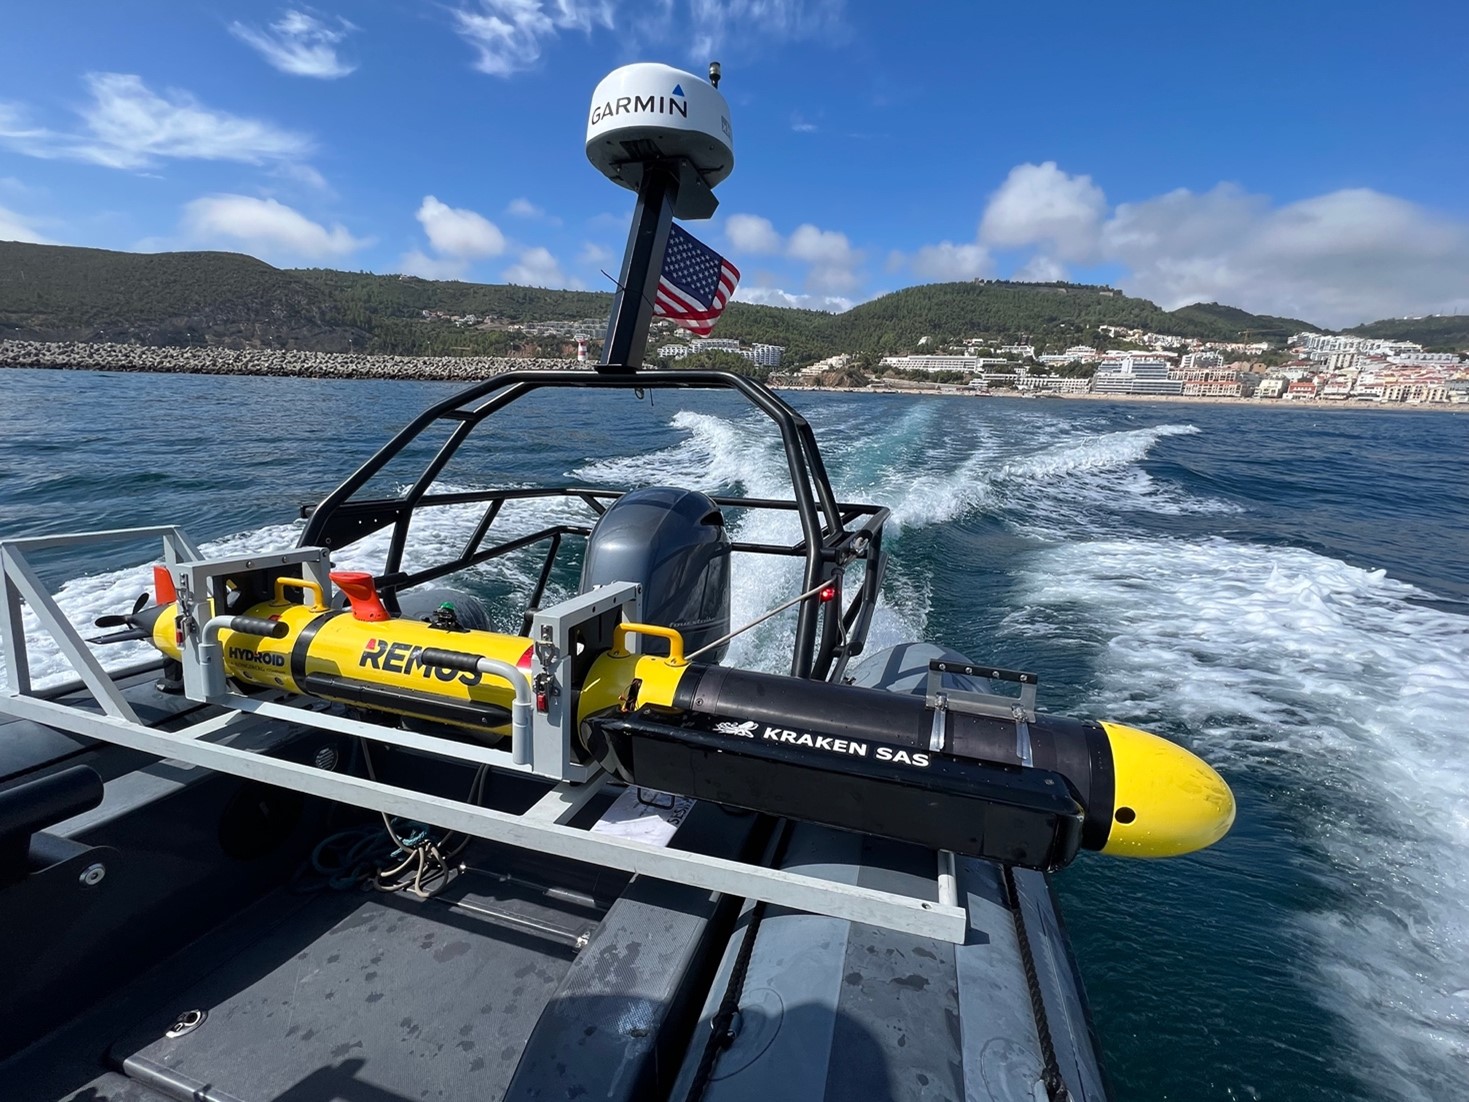 Kraken MP-SAS on Royal Netherlands Navy REMUS 100 heading out to REPMUS Naval Mine Warfare operating areas off Sesimbra, Portugal.